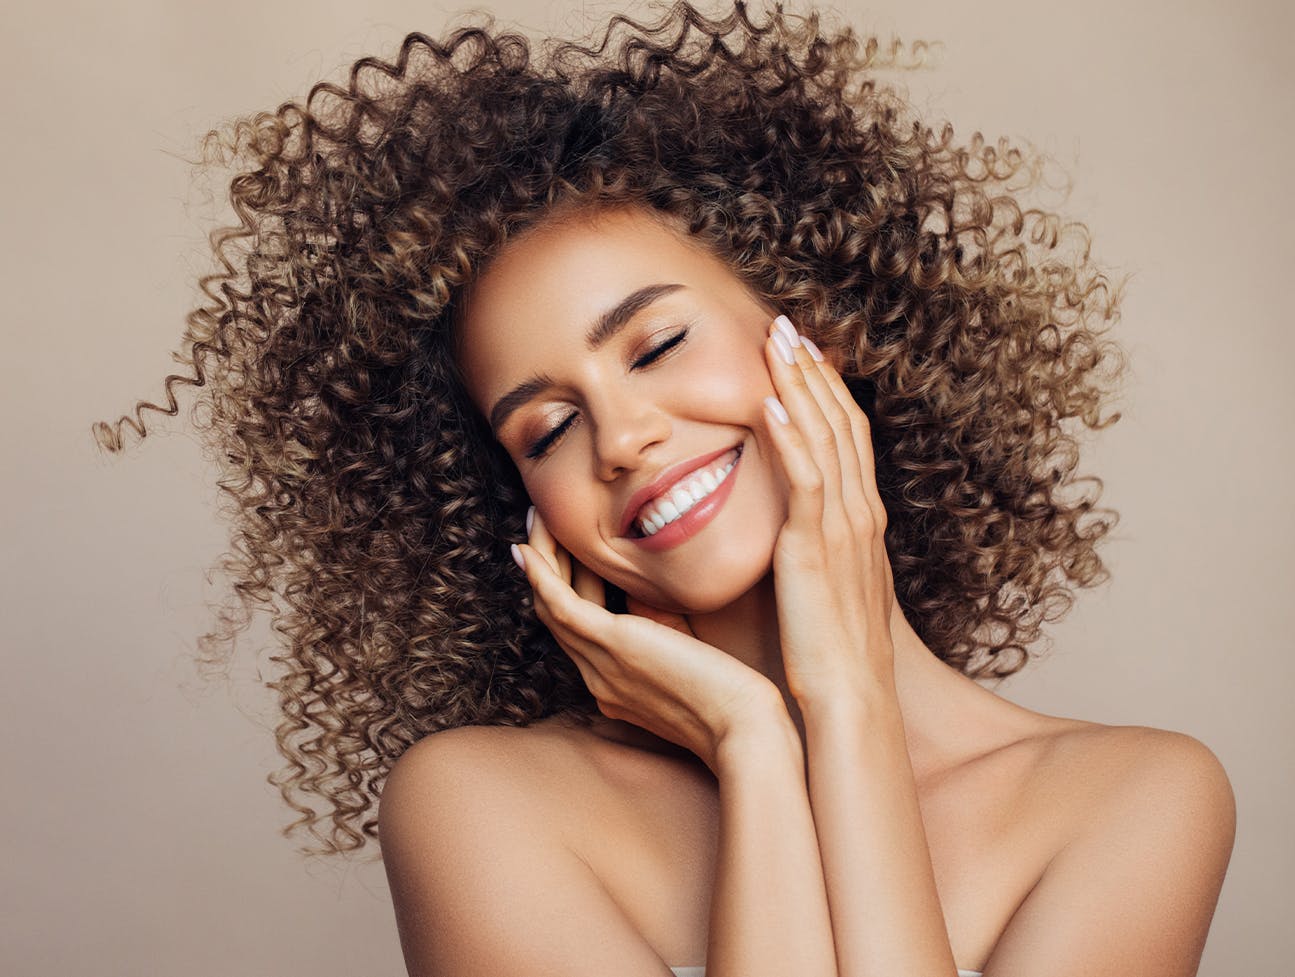 woman with curly brunette hair smiling touching face